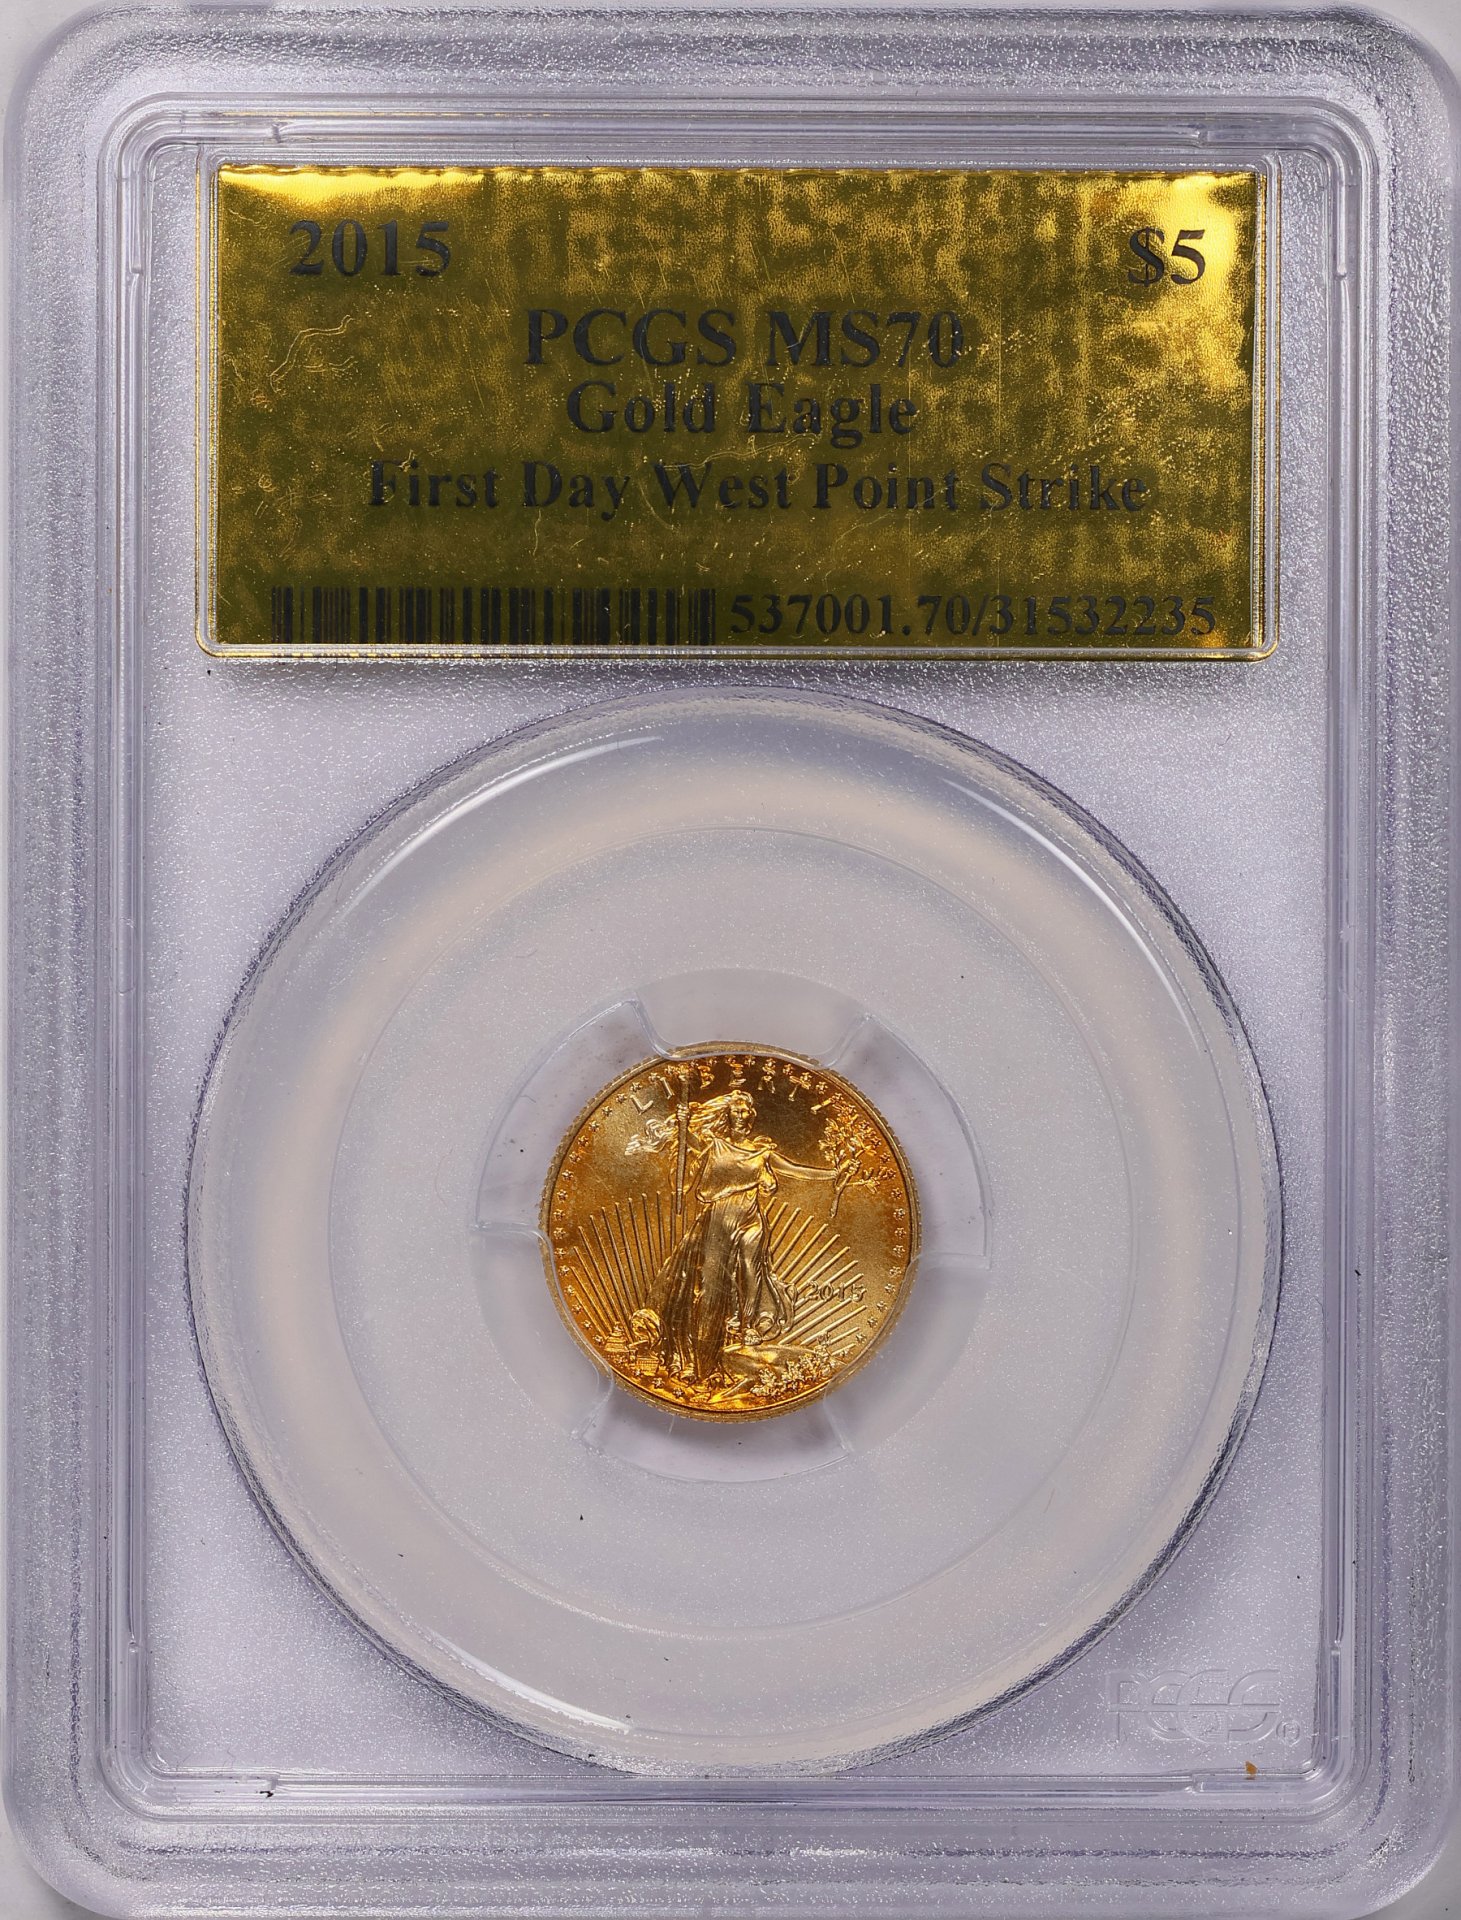 2015 $5 Tenth-Ounce Gold American Eagle PCGS MS70 31532235 (Gold Foil Label) Obv Slab GC.jpg